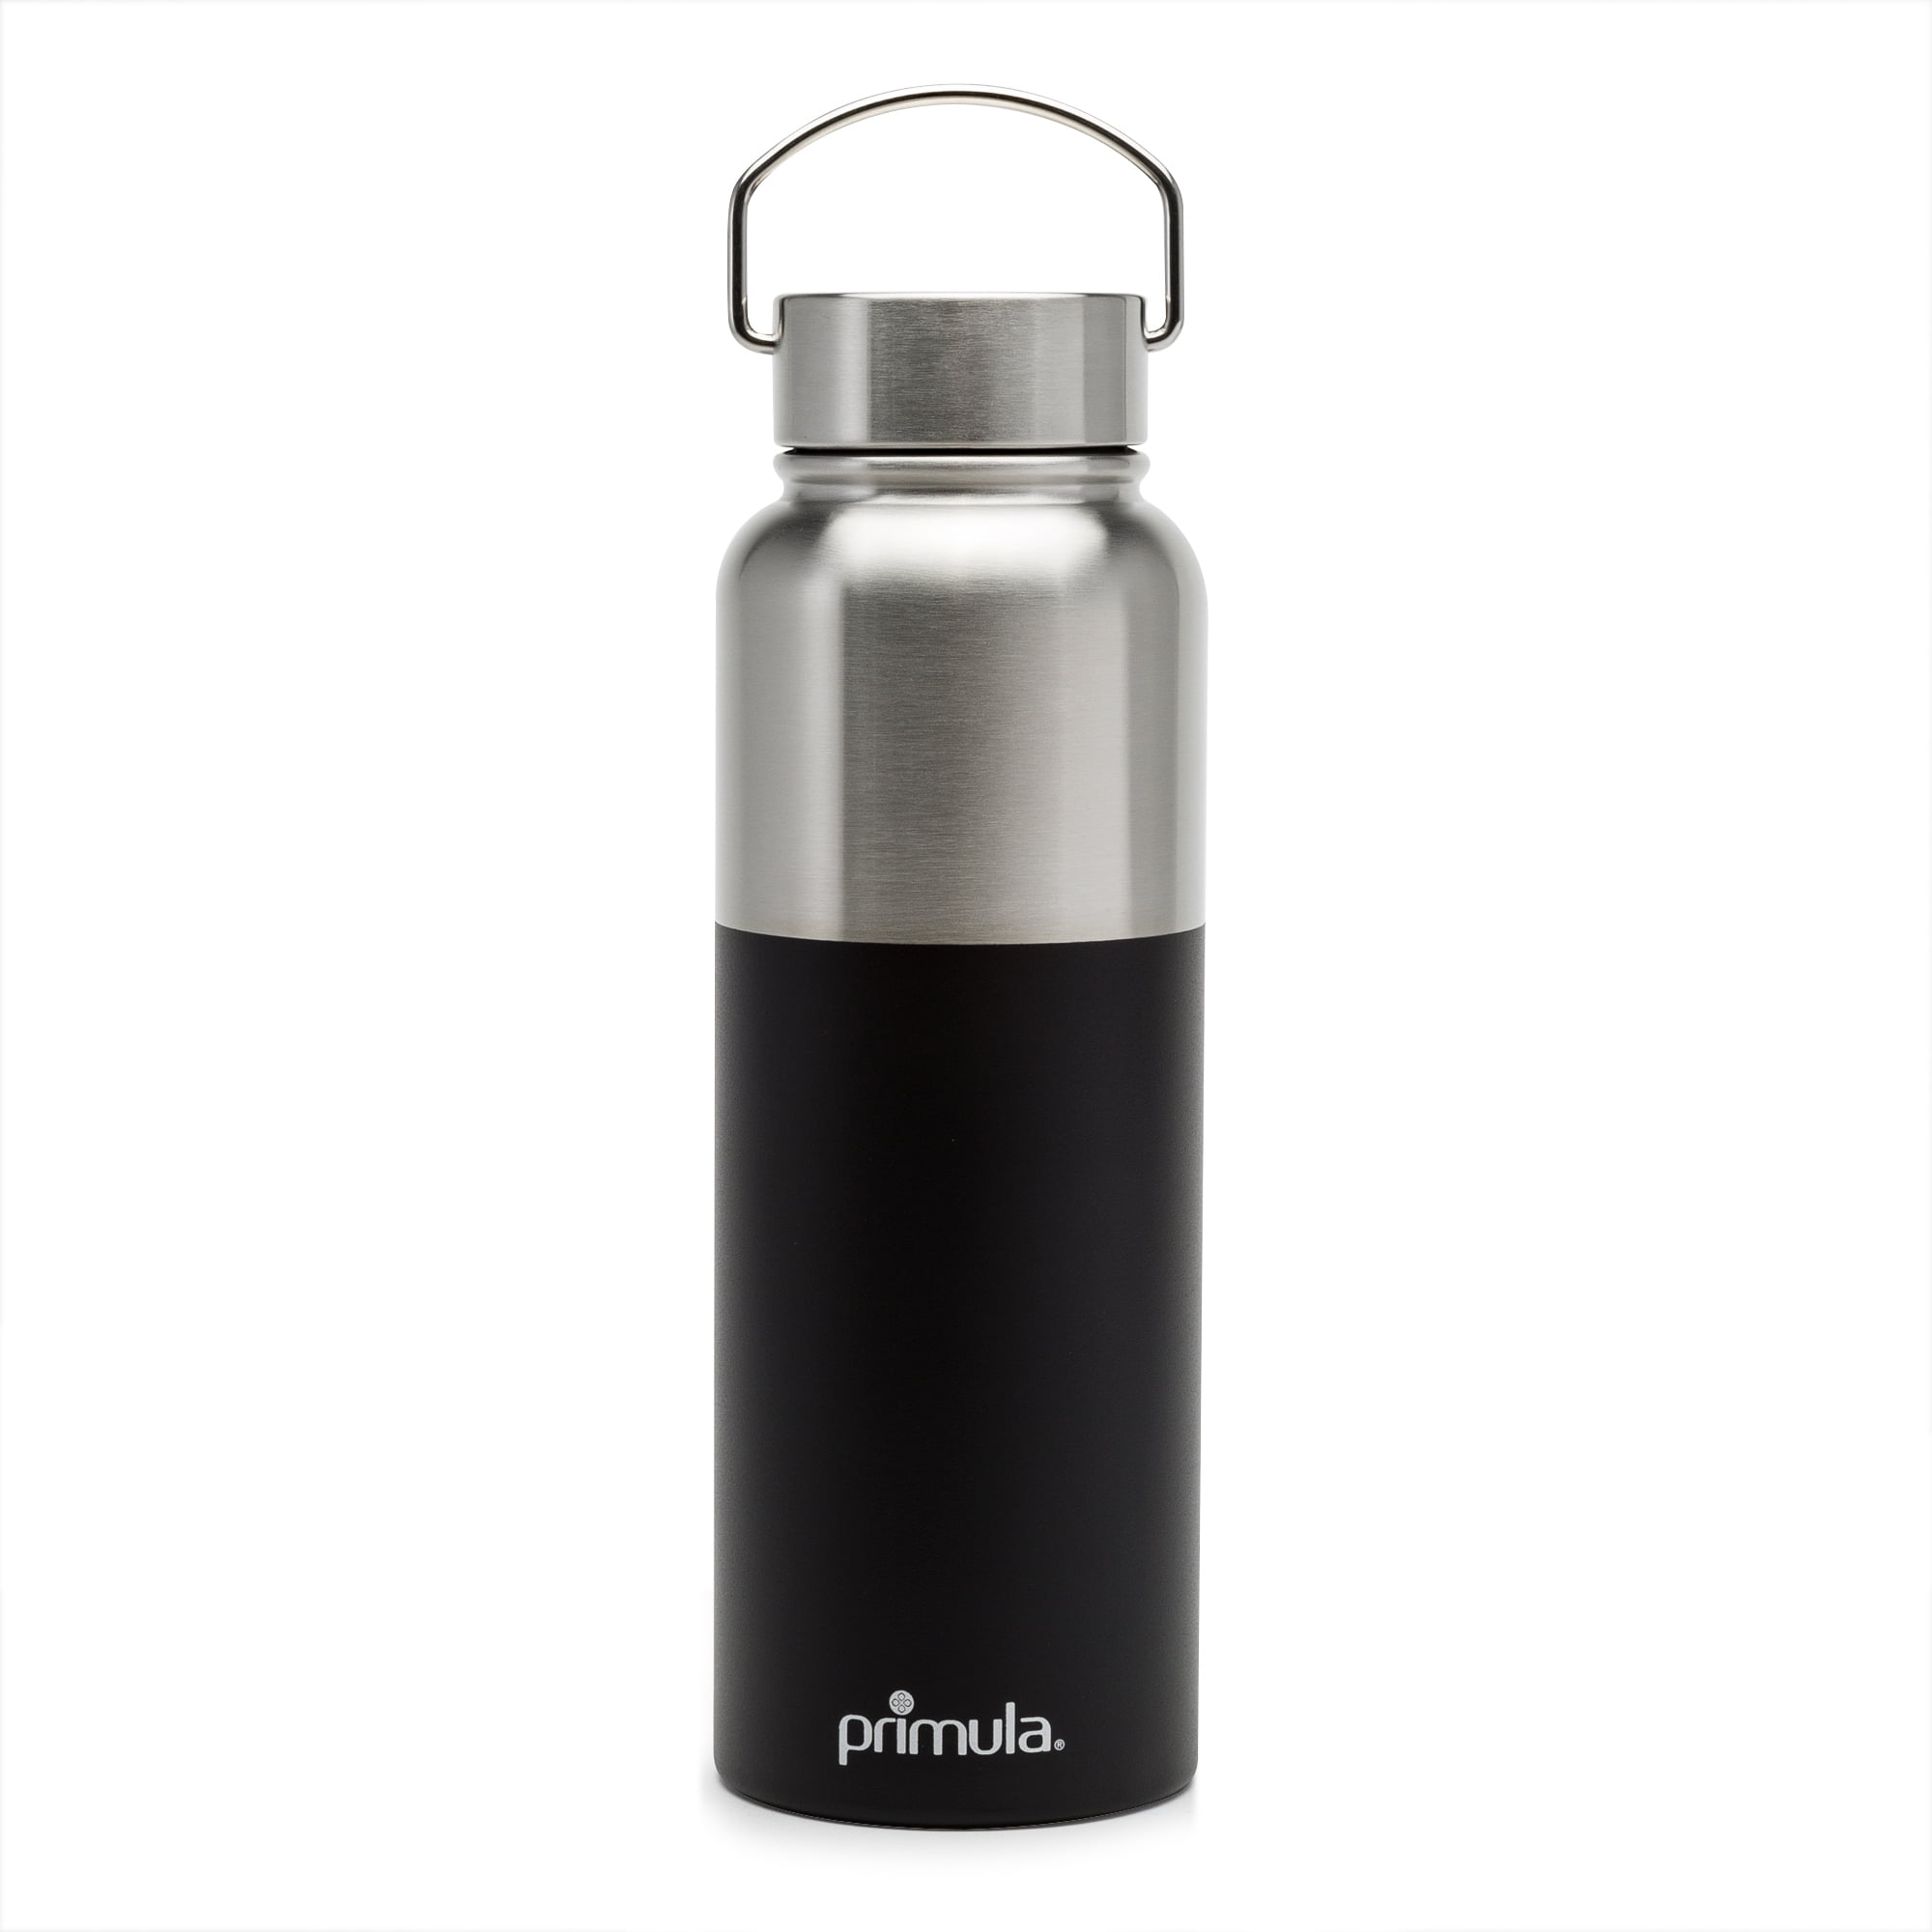  Primula Avalanche Double Walled Vacuum Sealed Stainless Steel  Thermal Insulated Tumbler Stays Cold or Hot All Day Long, Reusable Thermos,  1 Count (Pack of 1), Copper: Home & Kitchen